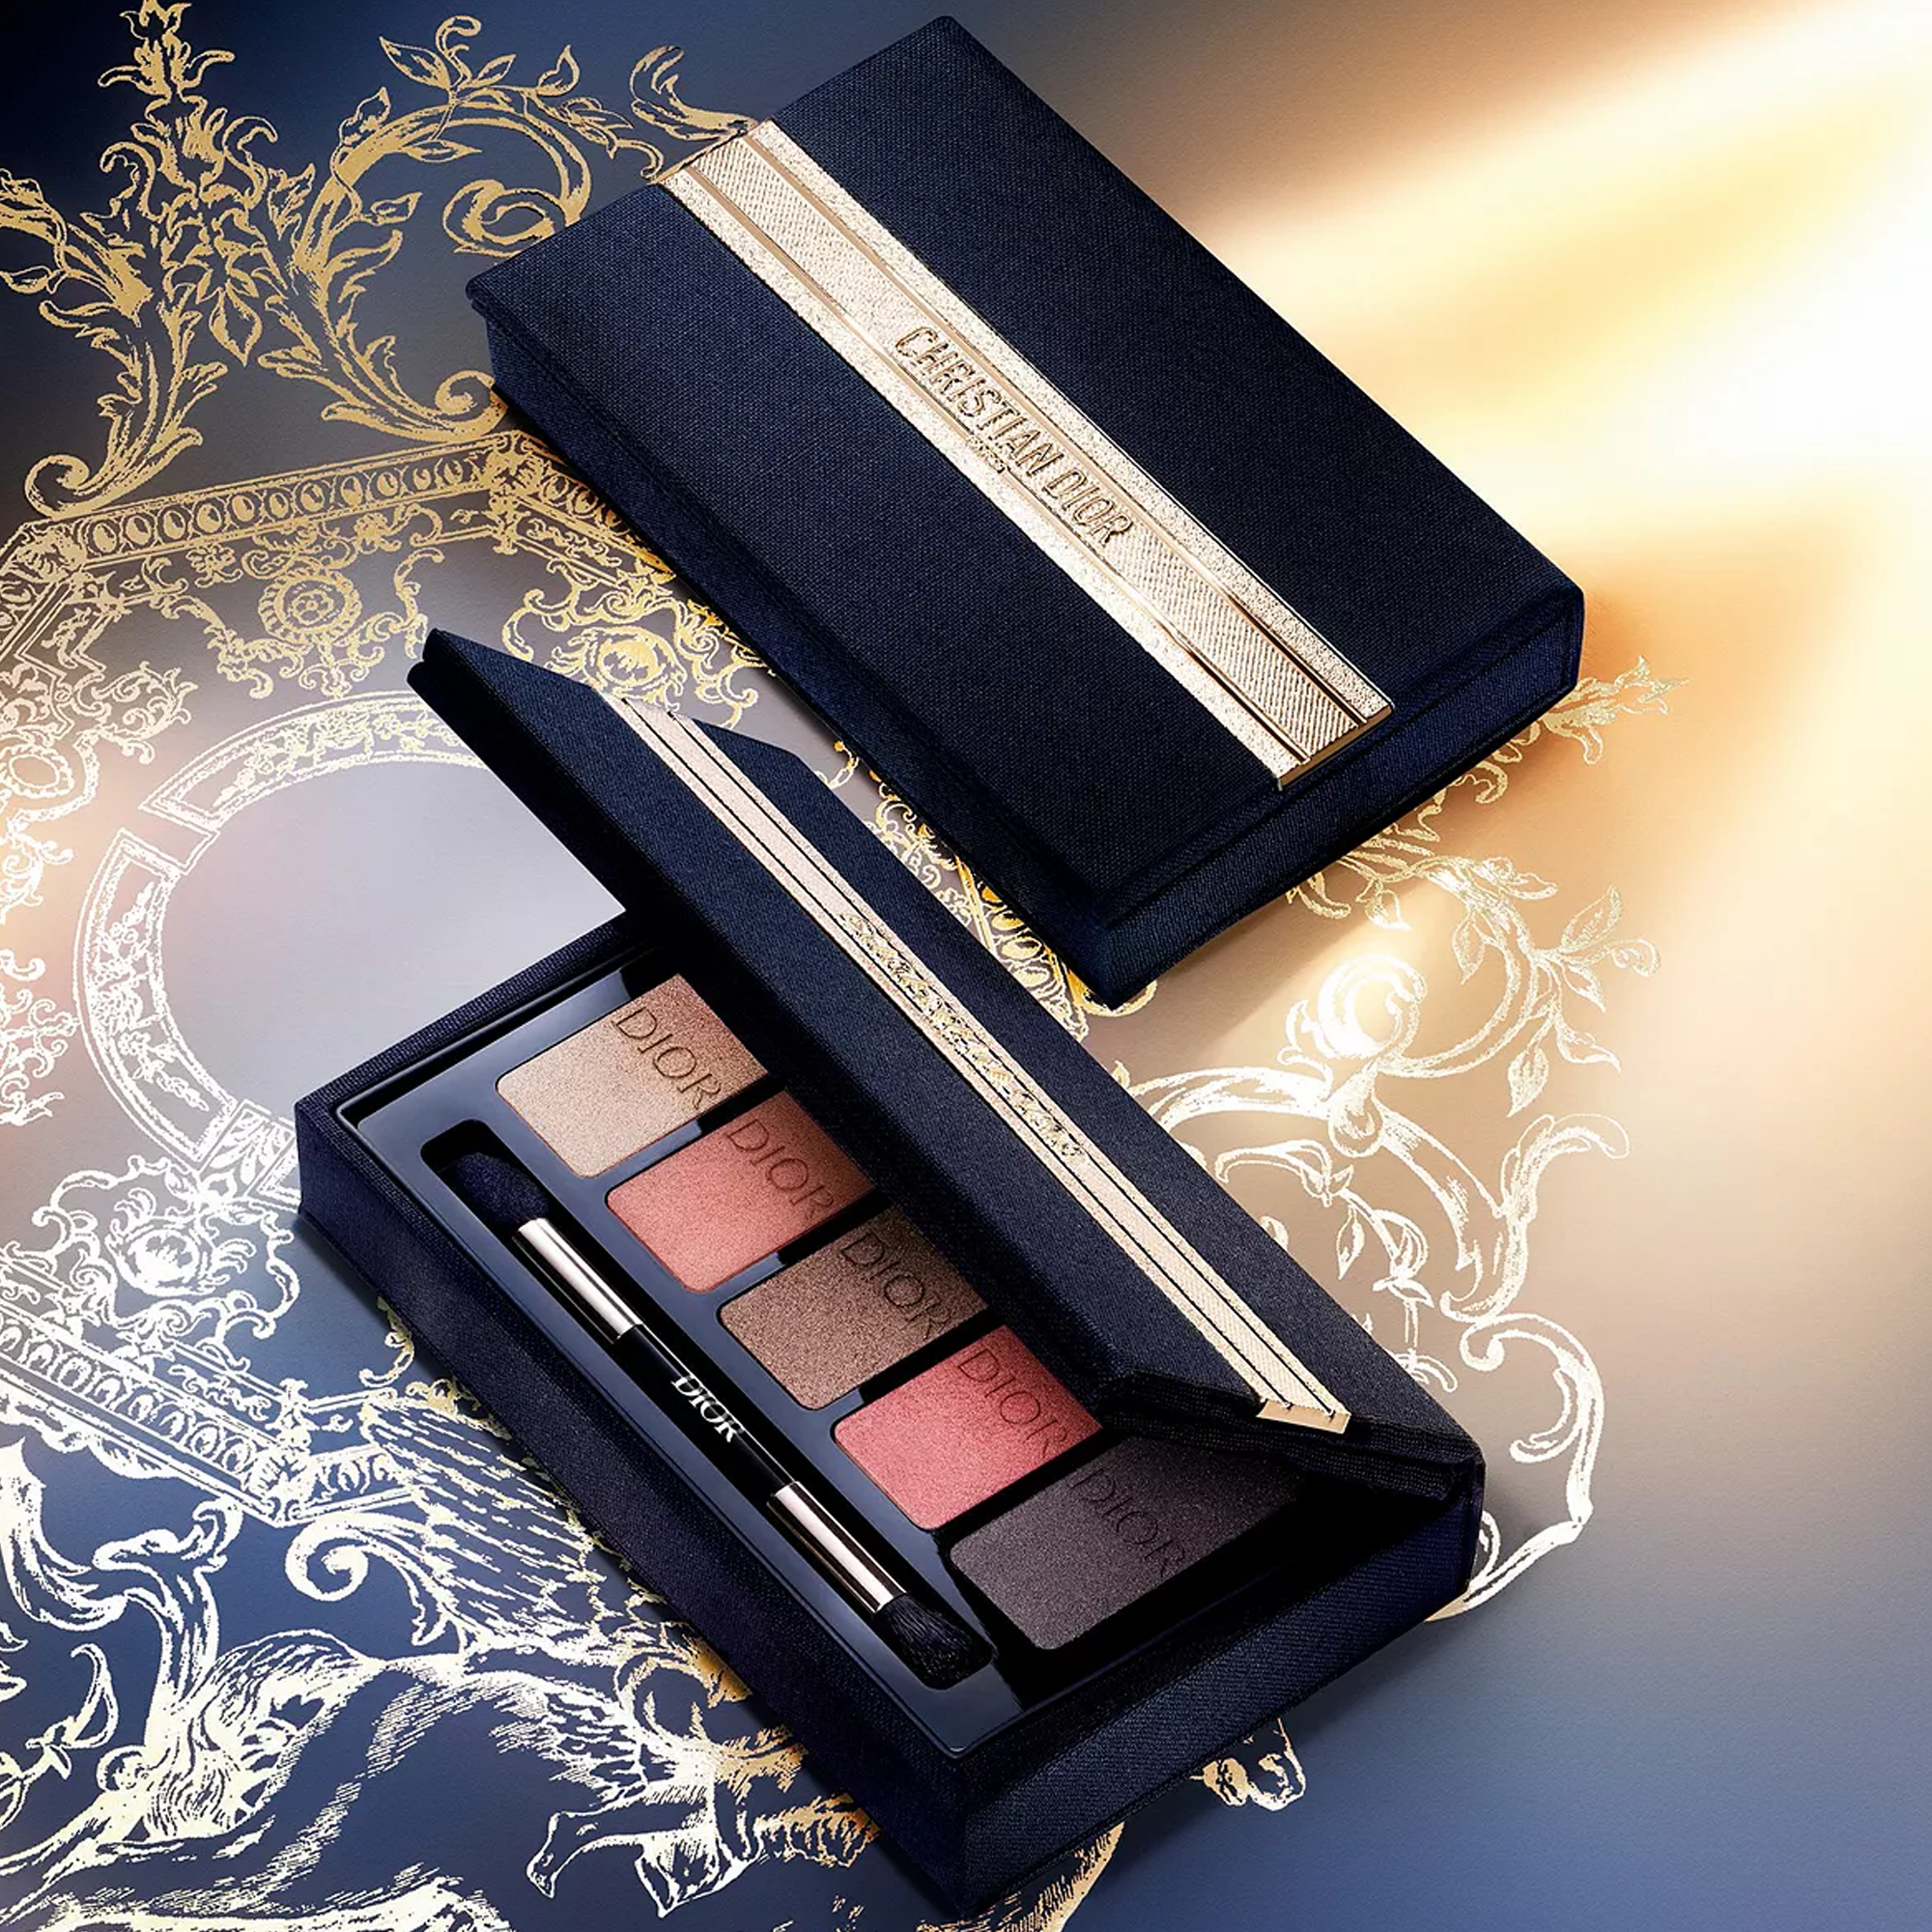 Limited-Edition Iconic Couture Eyeshadow Palette